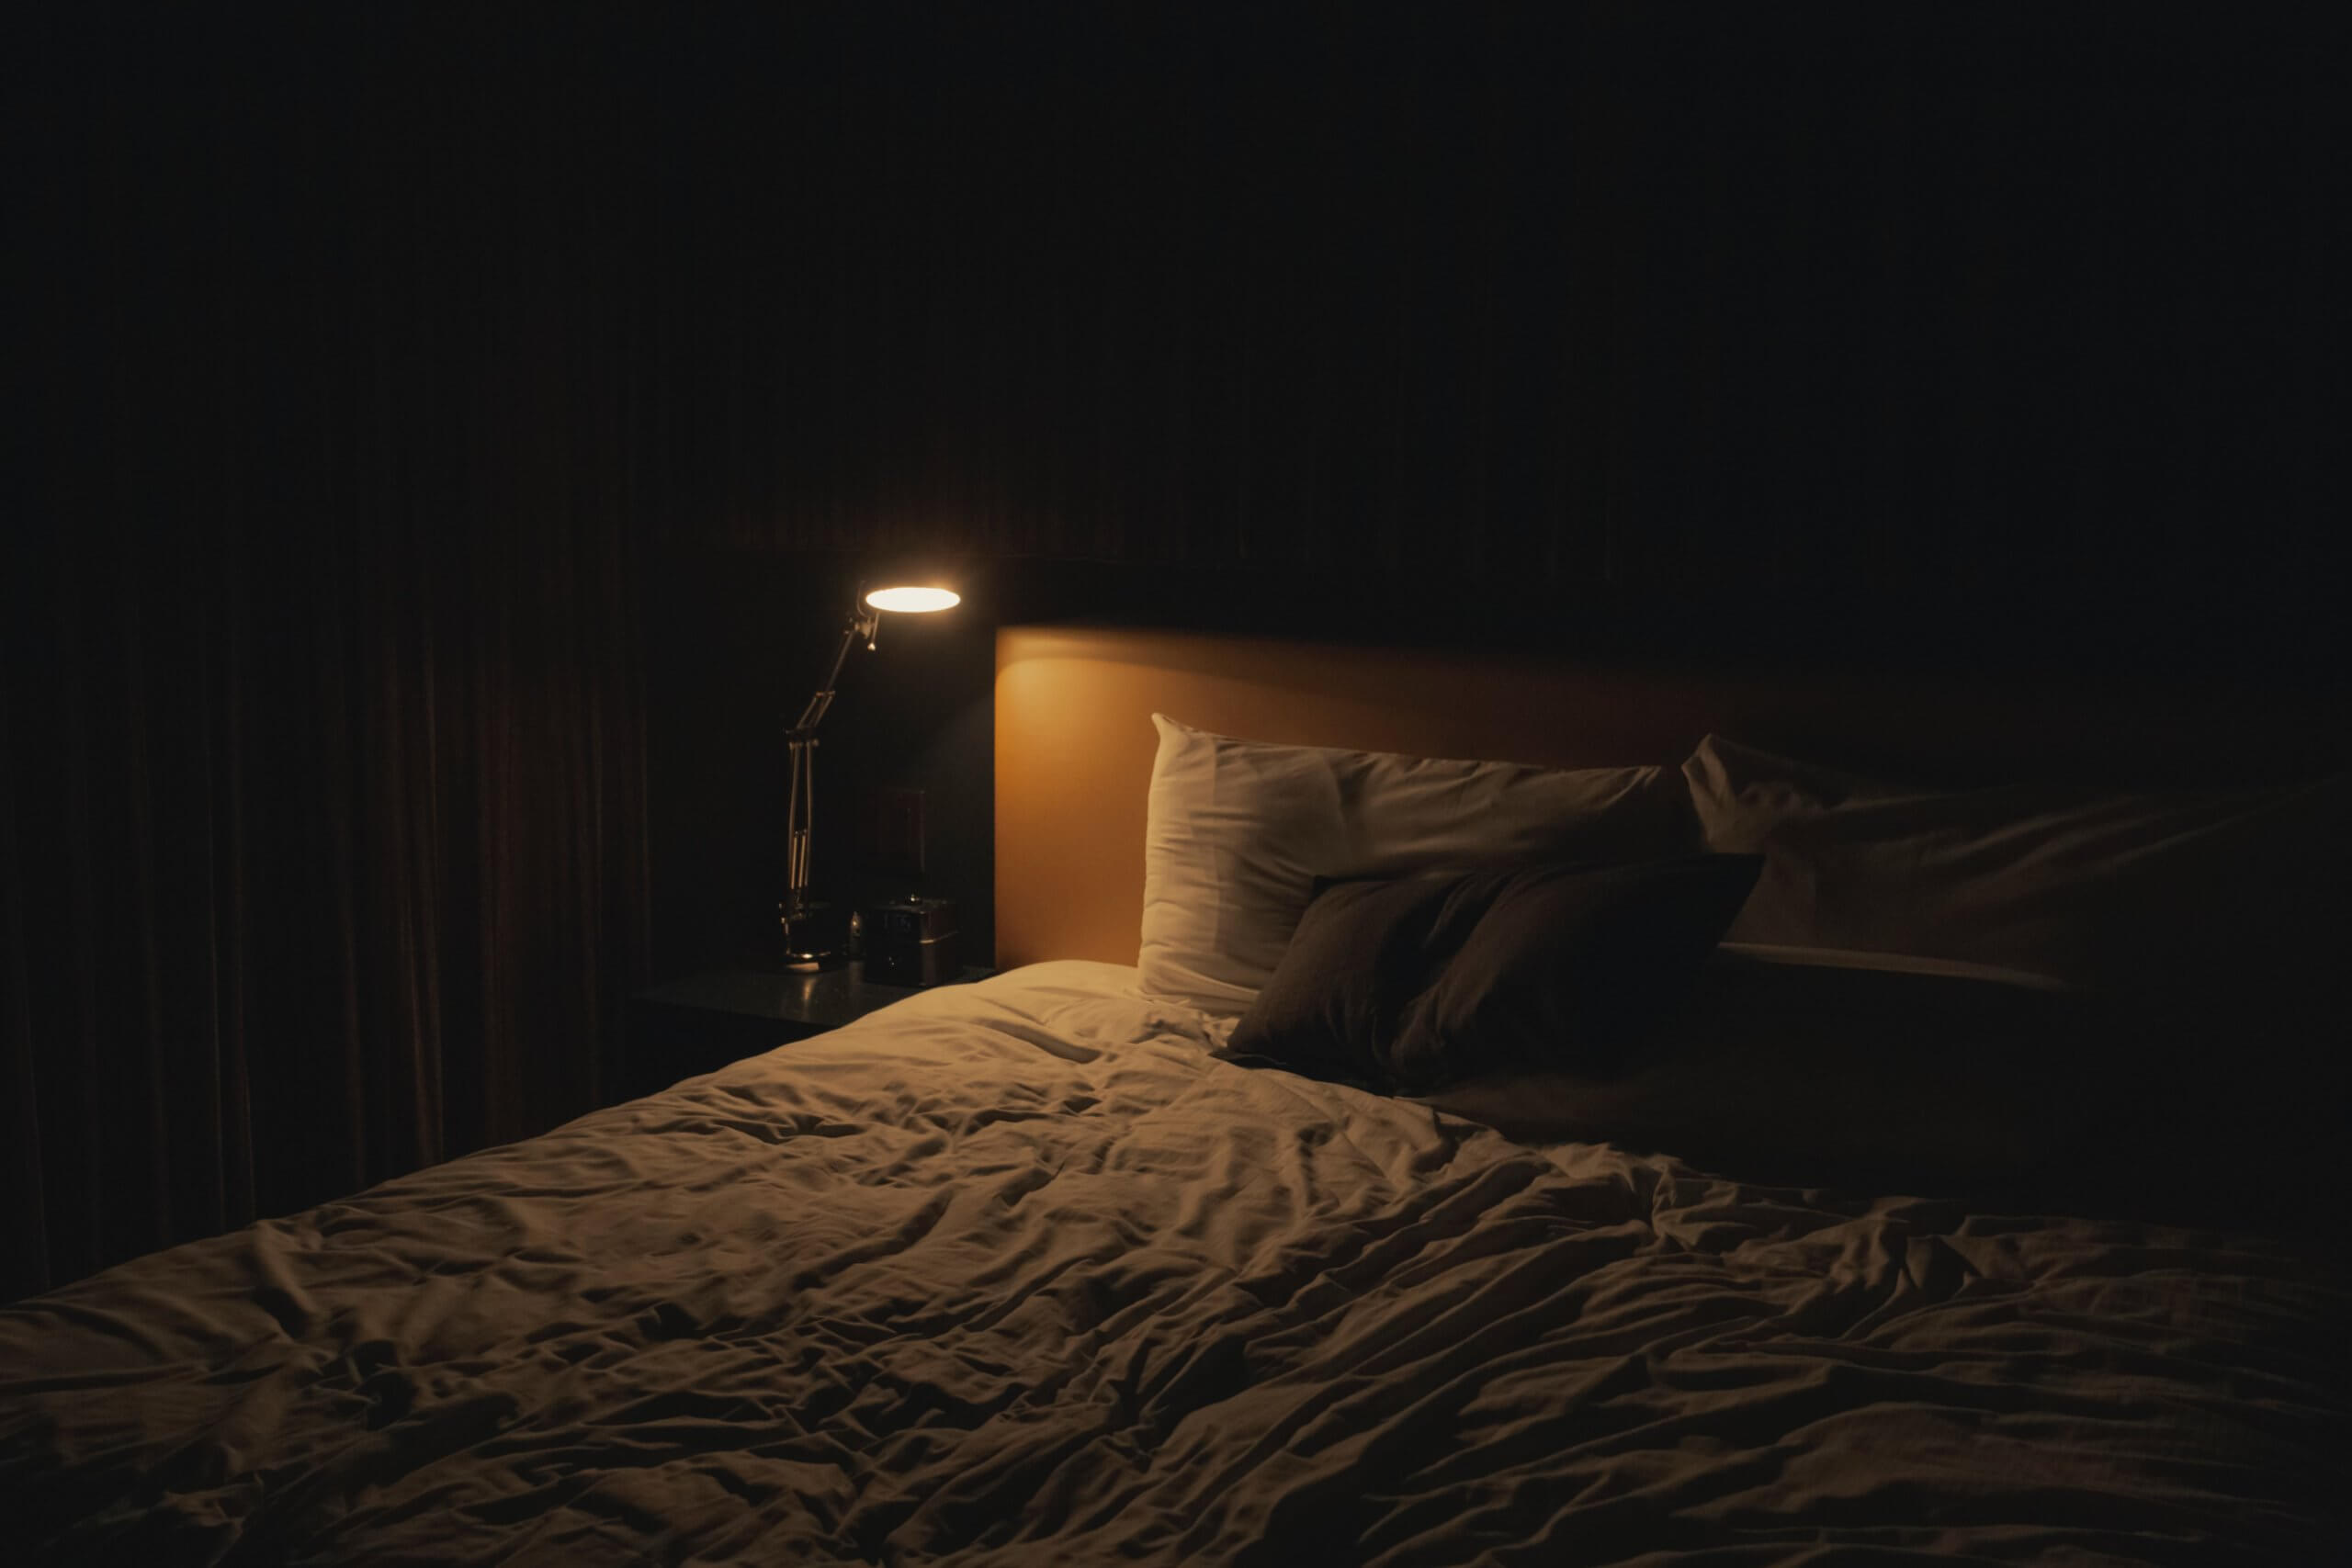 A lamp on a bedside table illuminating the corner of a bed.